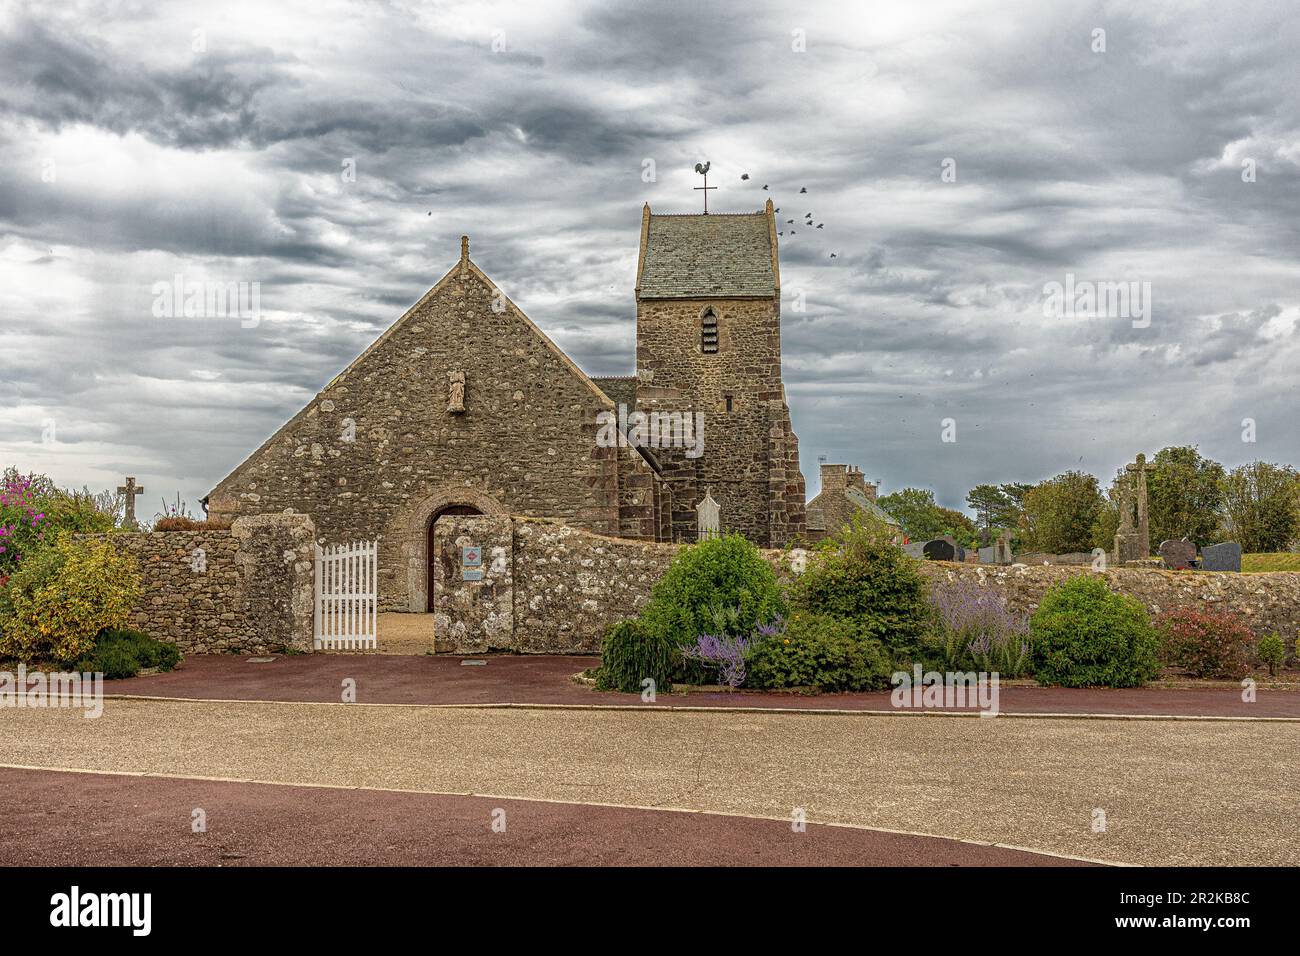 Church tower was built in 1554 and is a listed building. Stock Photo